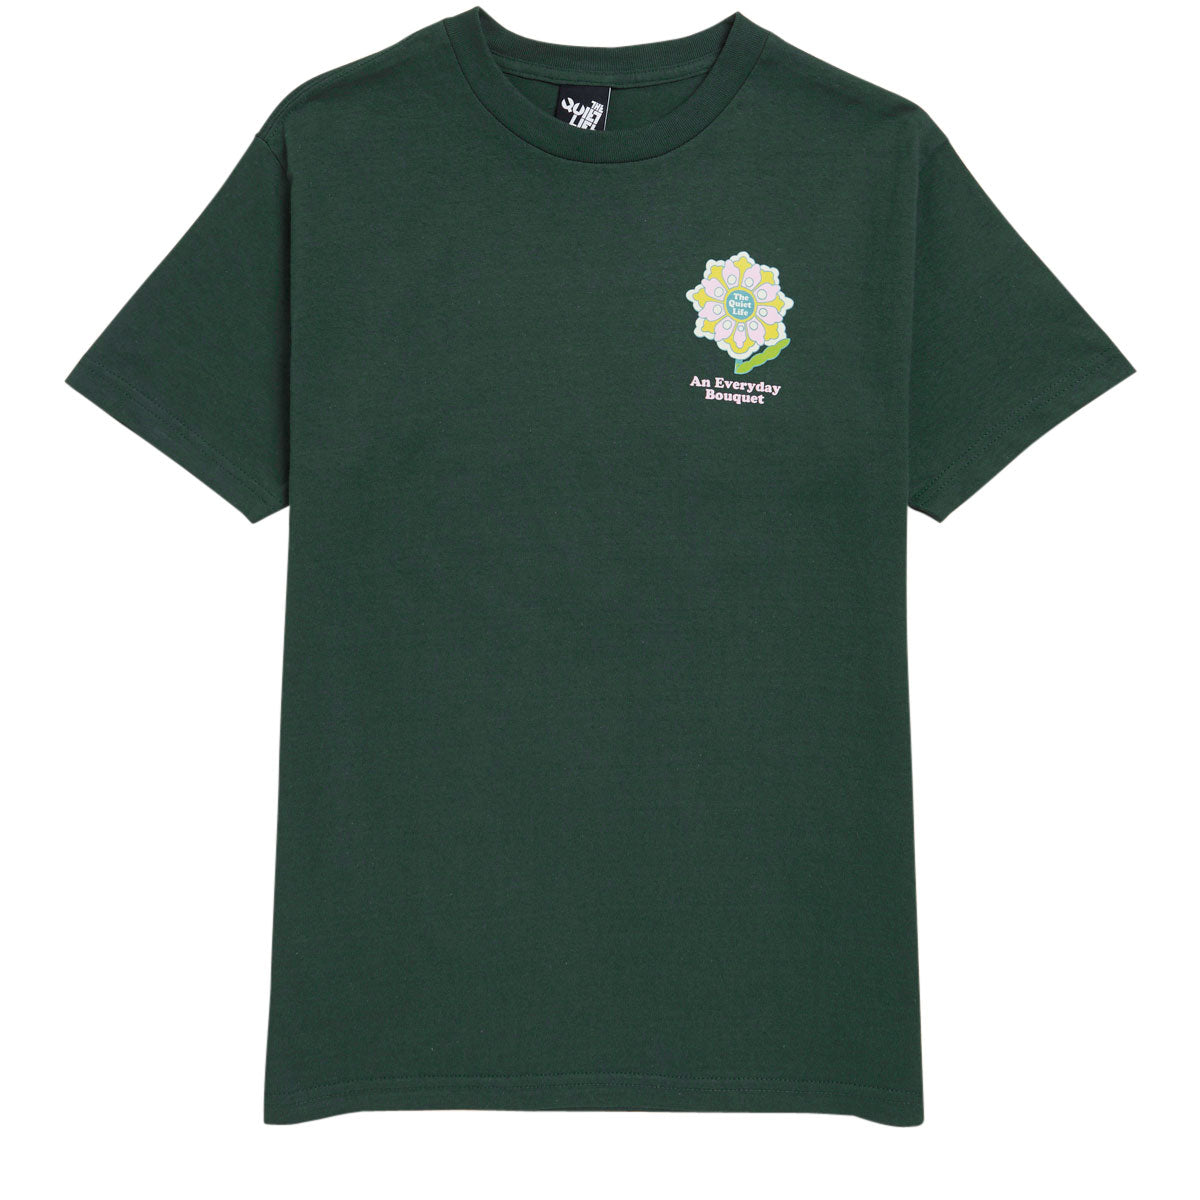 The Quiet Life Everyday Bouquet T-Shirt - Hunter Green image 2